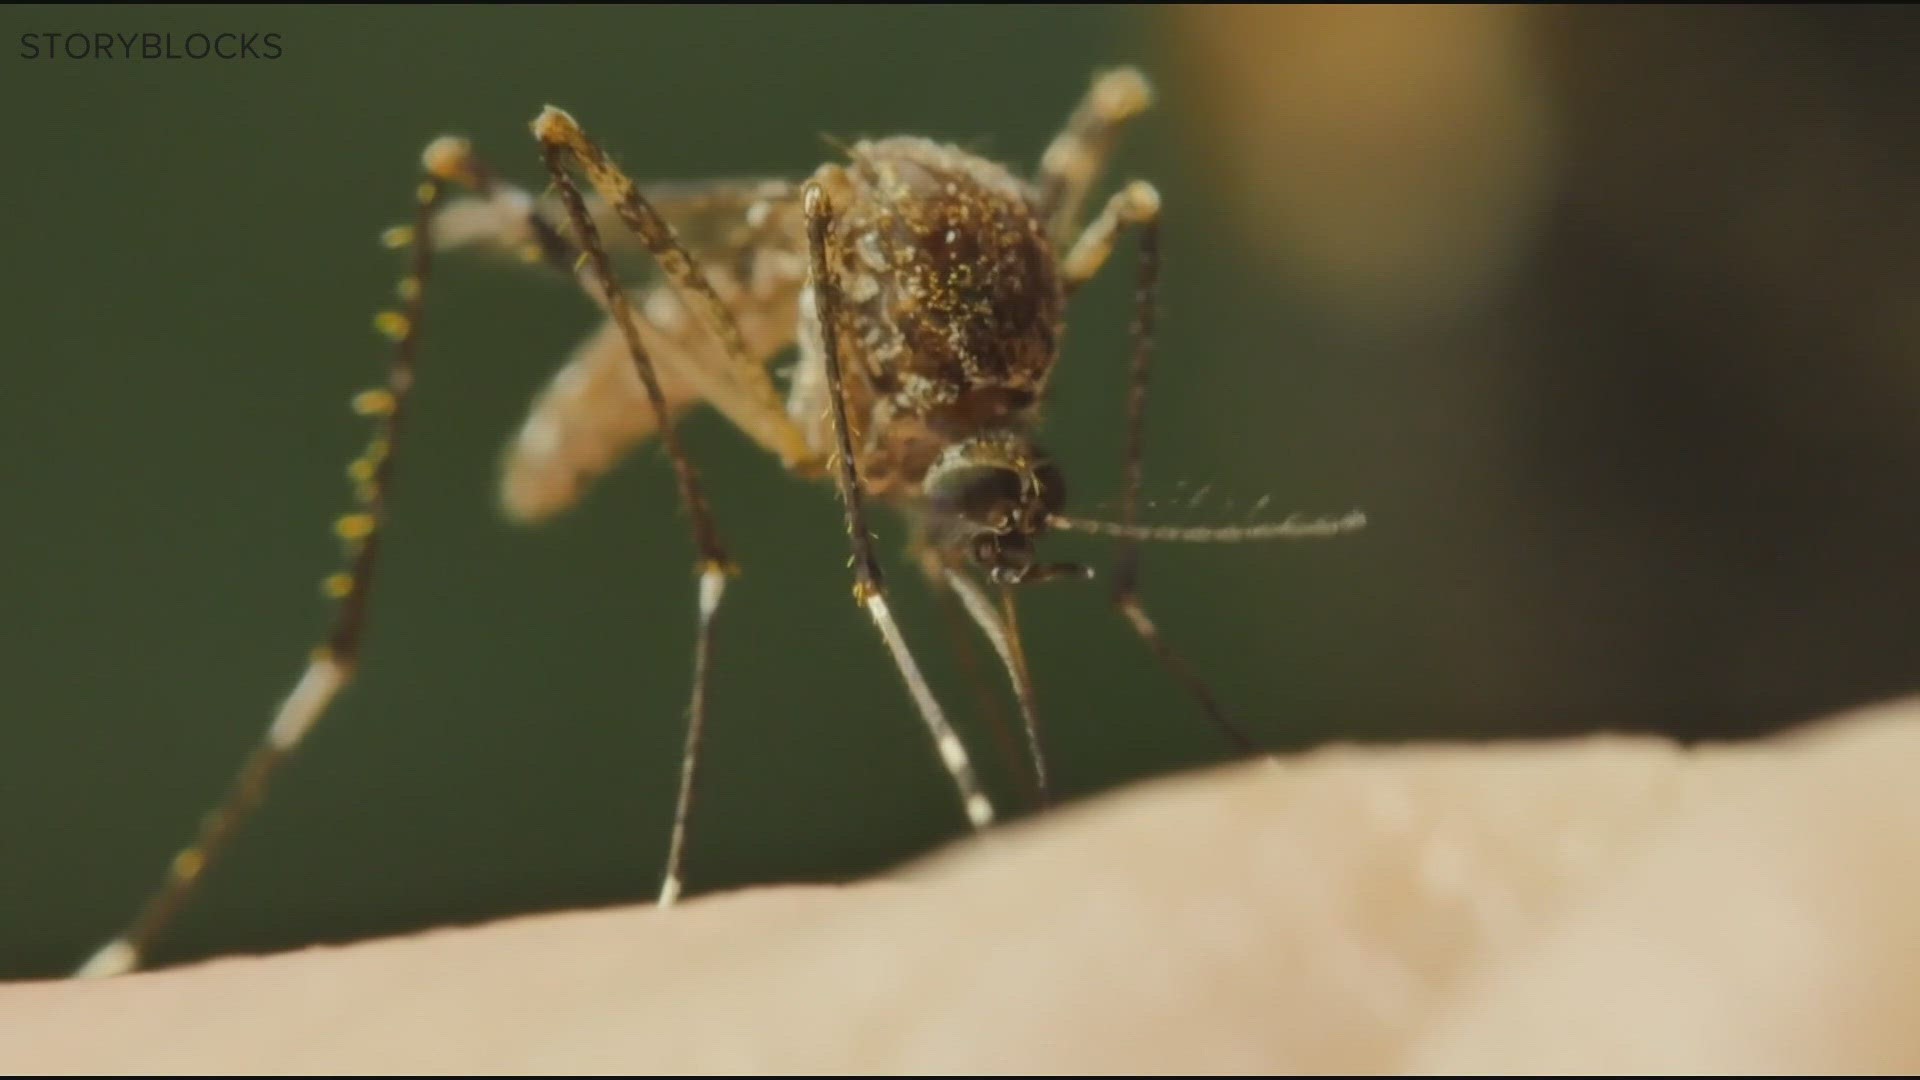 It's the first time the virus has been detected in mosquitoes in Maine since 2019.